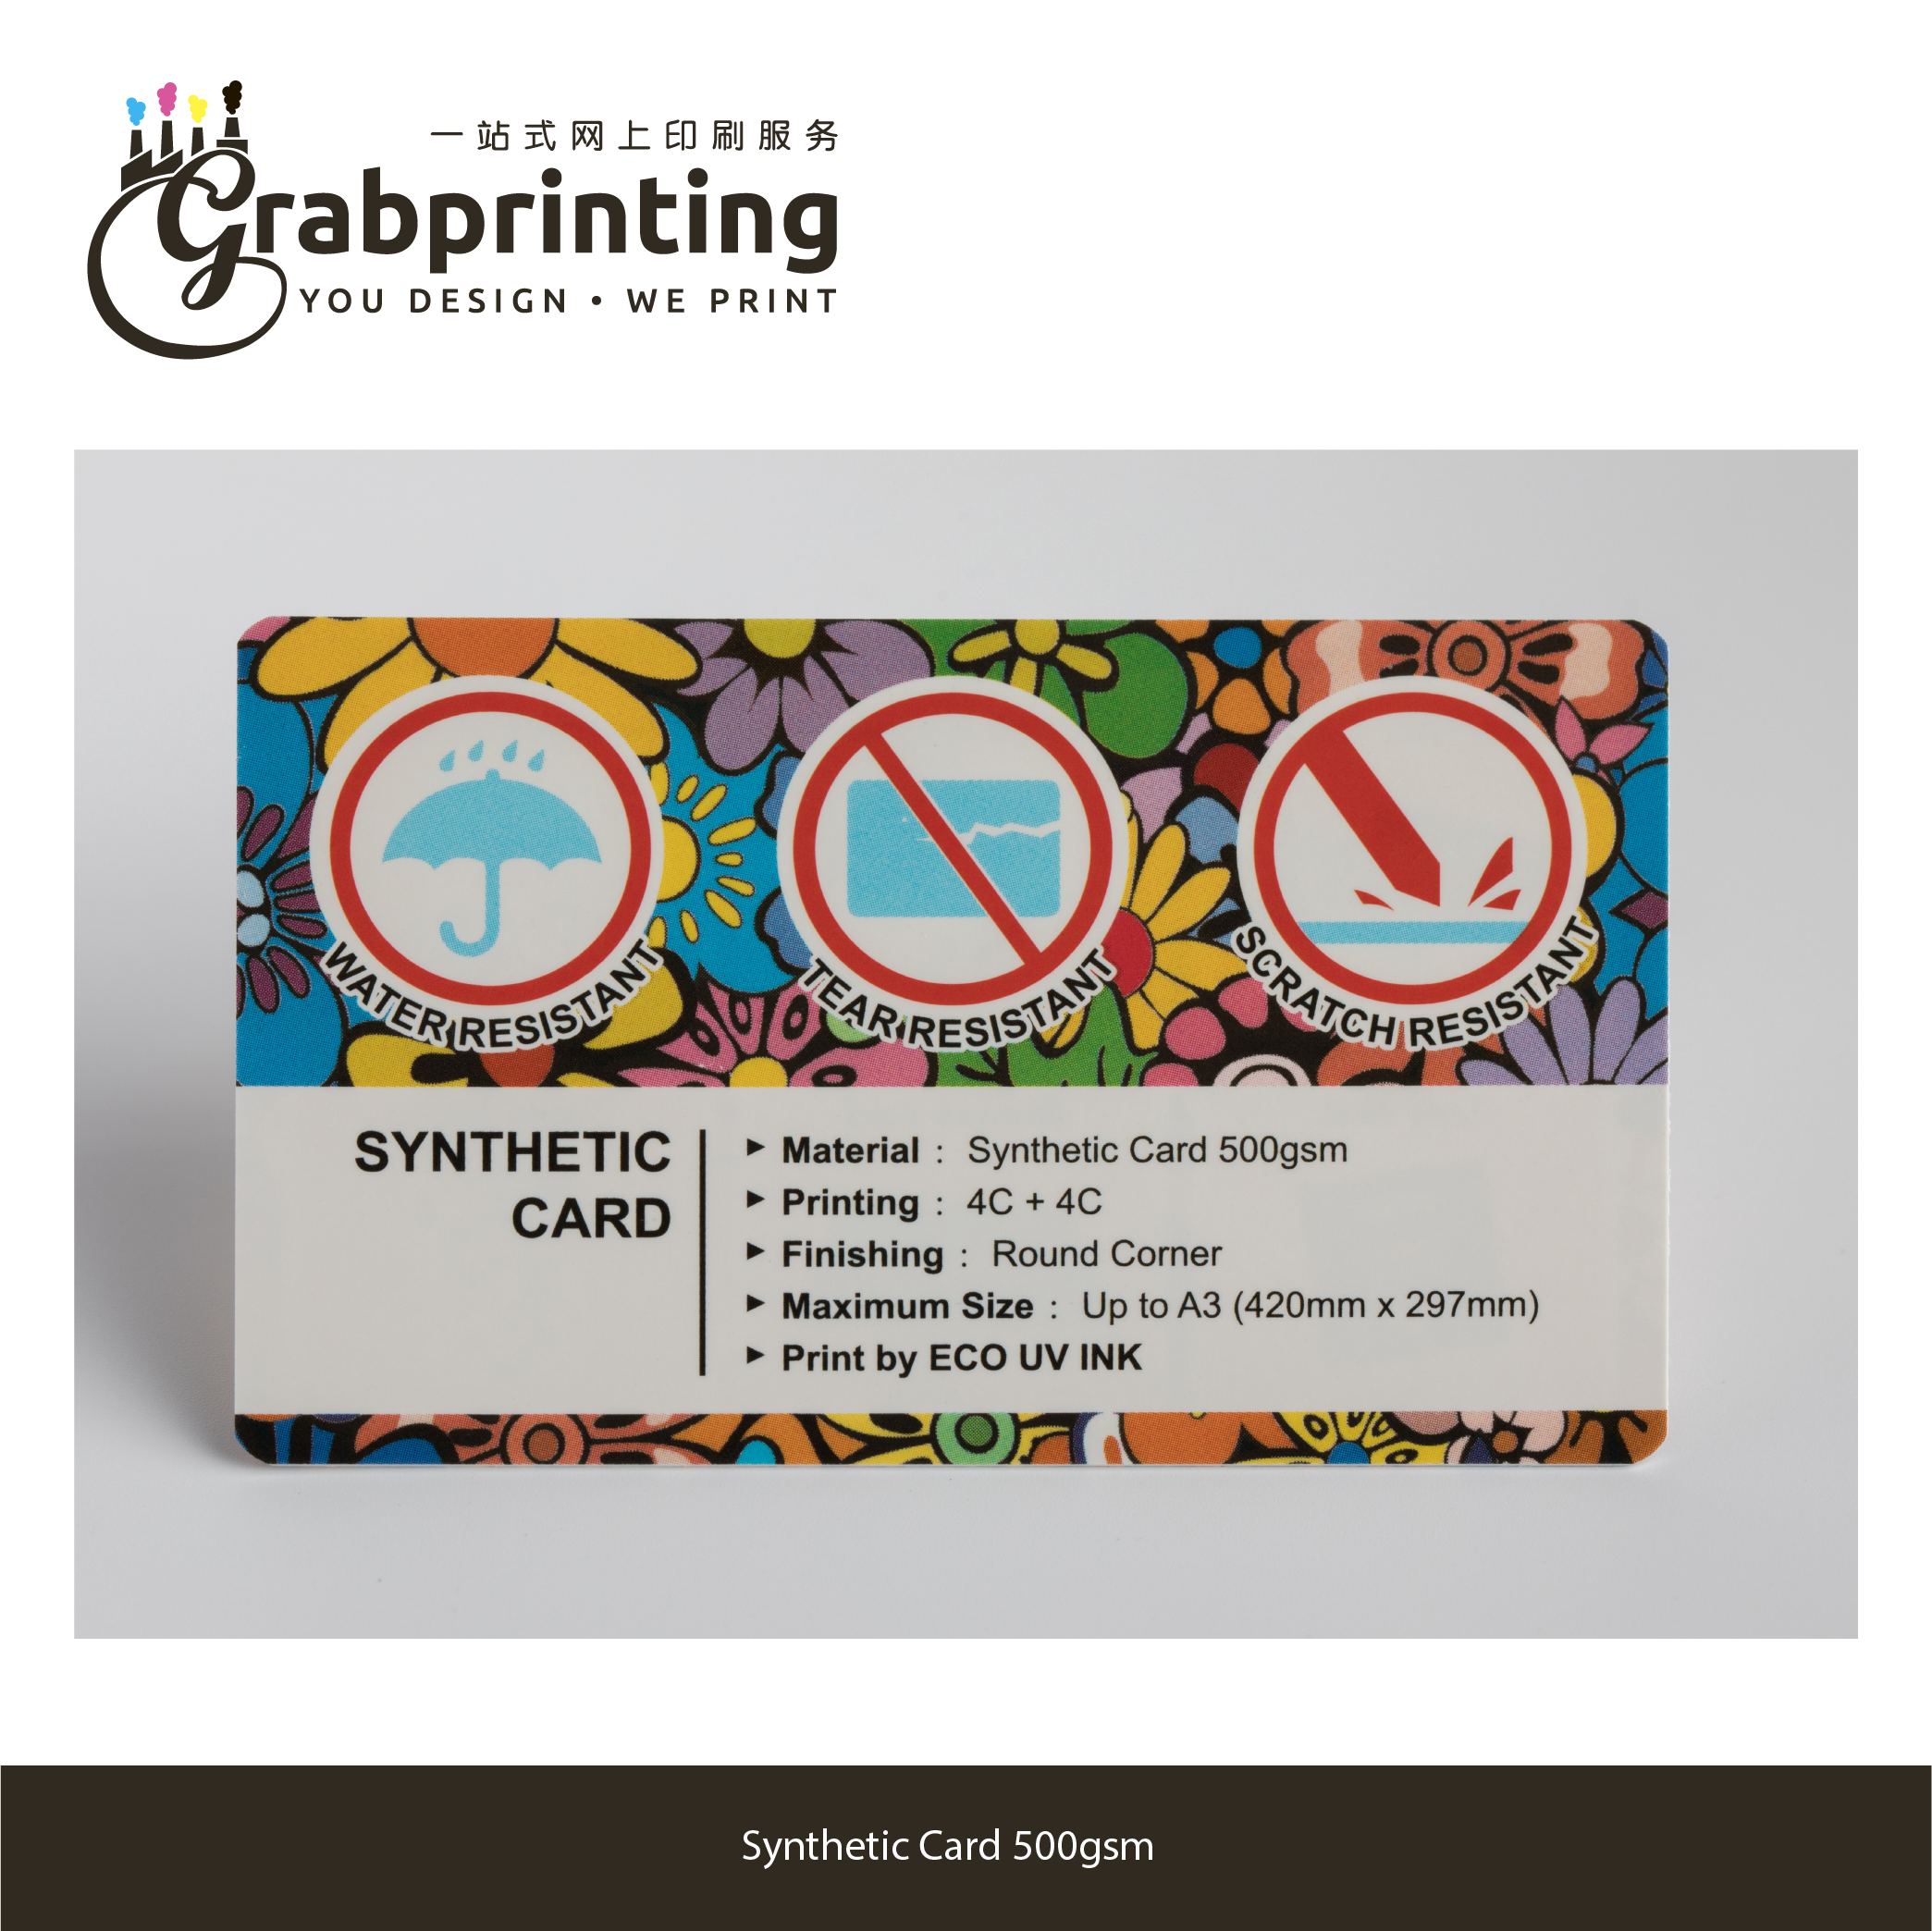 Name Card Sample Kit grabprinting 44 Synthetic Card 500gsm 501px 501px